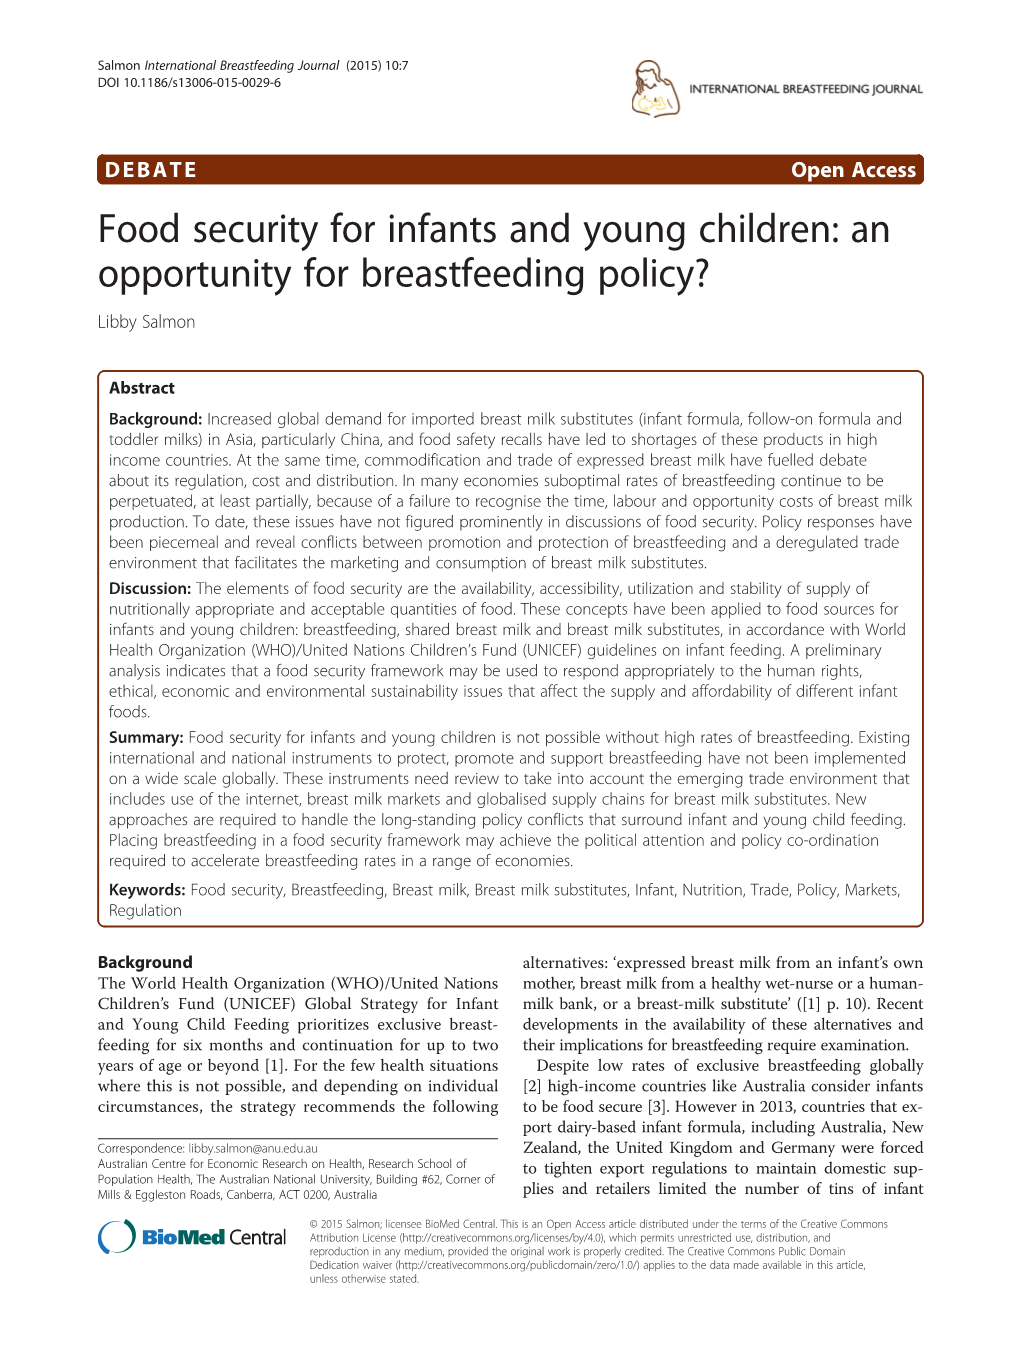 Food Security for Infants and Young Children: an Opportunity for Breastfeeding Policy? Libby Salmon